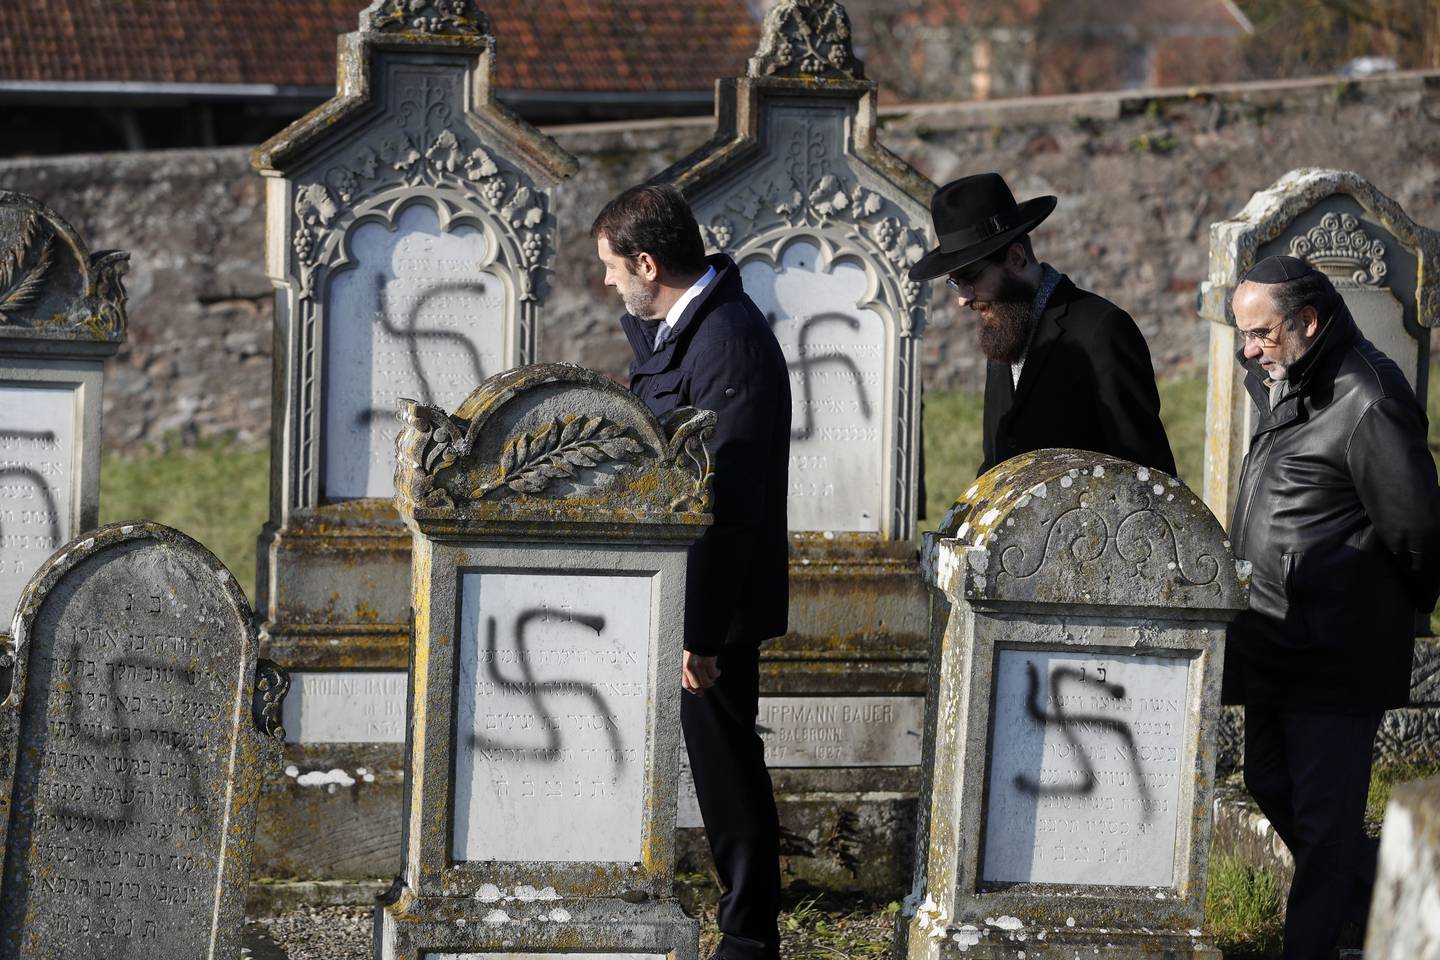 French Interior Minister Christophe Castaner, center, followed by Strasbourg chief Rabbi Harold Abraham Weill, second right, walk amid vandalized tombs in the Jewish cemetery of Westhoffen, west of the city of Strasbourg, eastern France, Wednesday, Dec. 4, 2019. Regional authorities in eastern France say vandals have scrawled anti-Semitic inscriptions, including swastikas spray-painted in black, on 107 tombs in a Jewish cemetery. (AP Photo/Jean-Francois Badias)